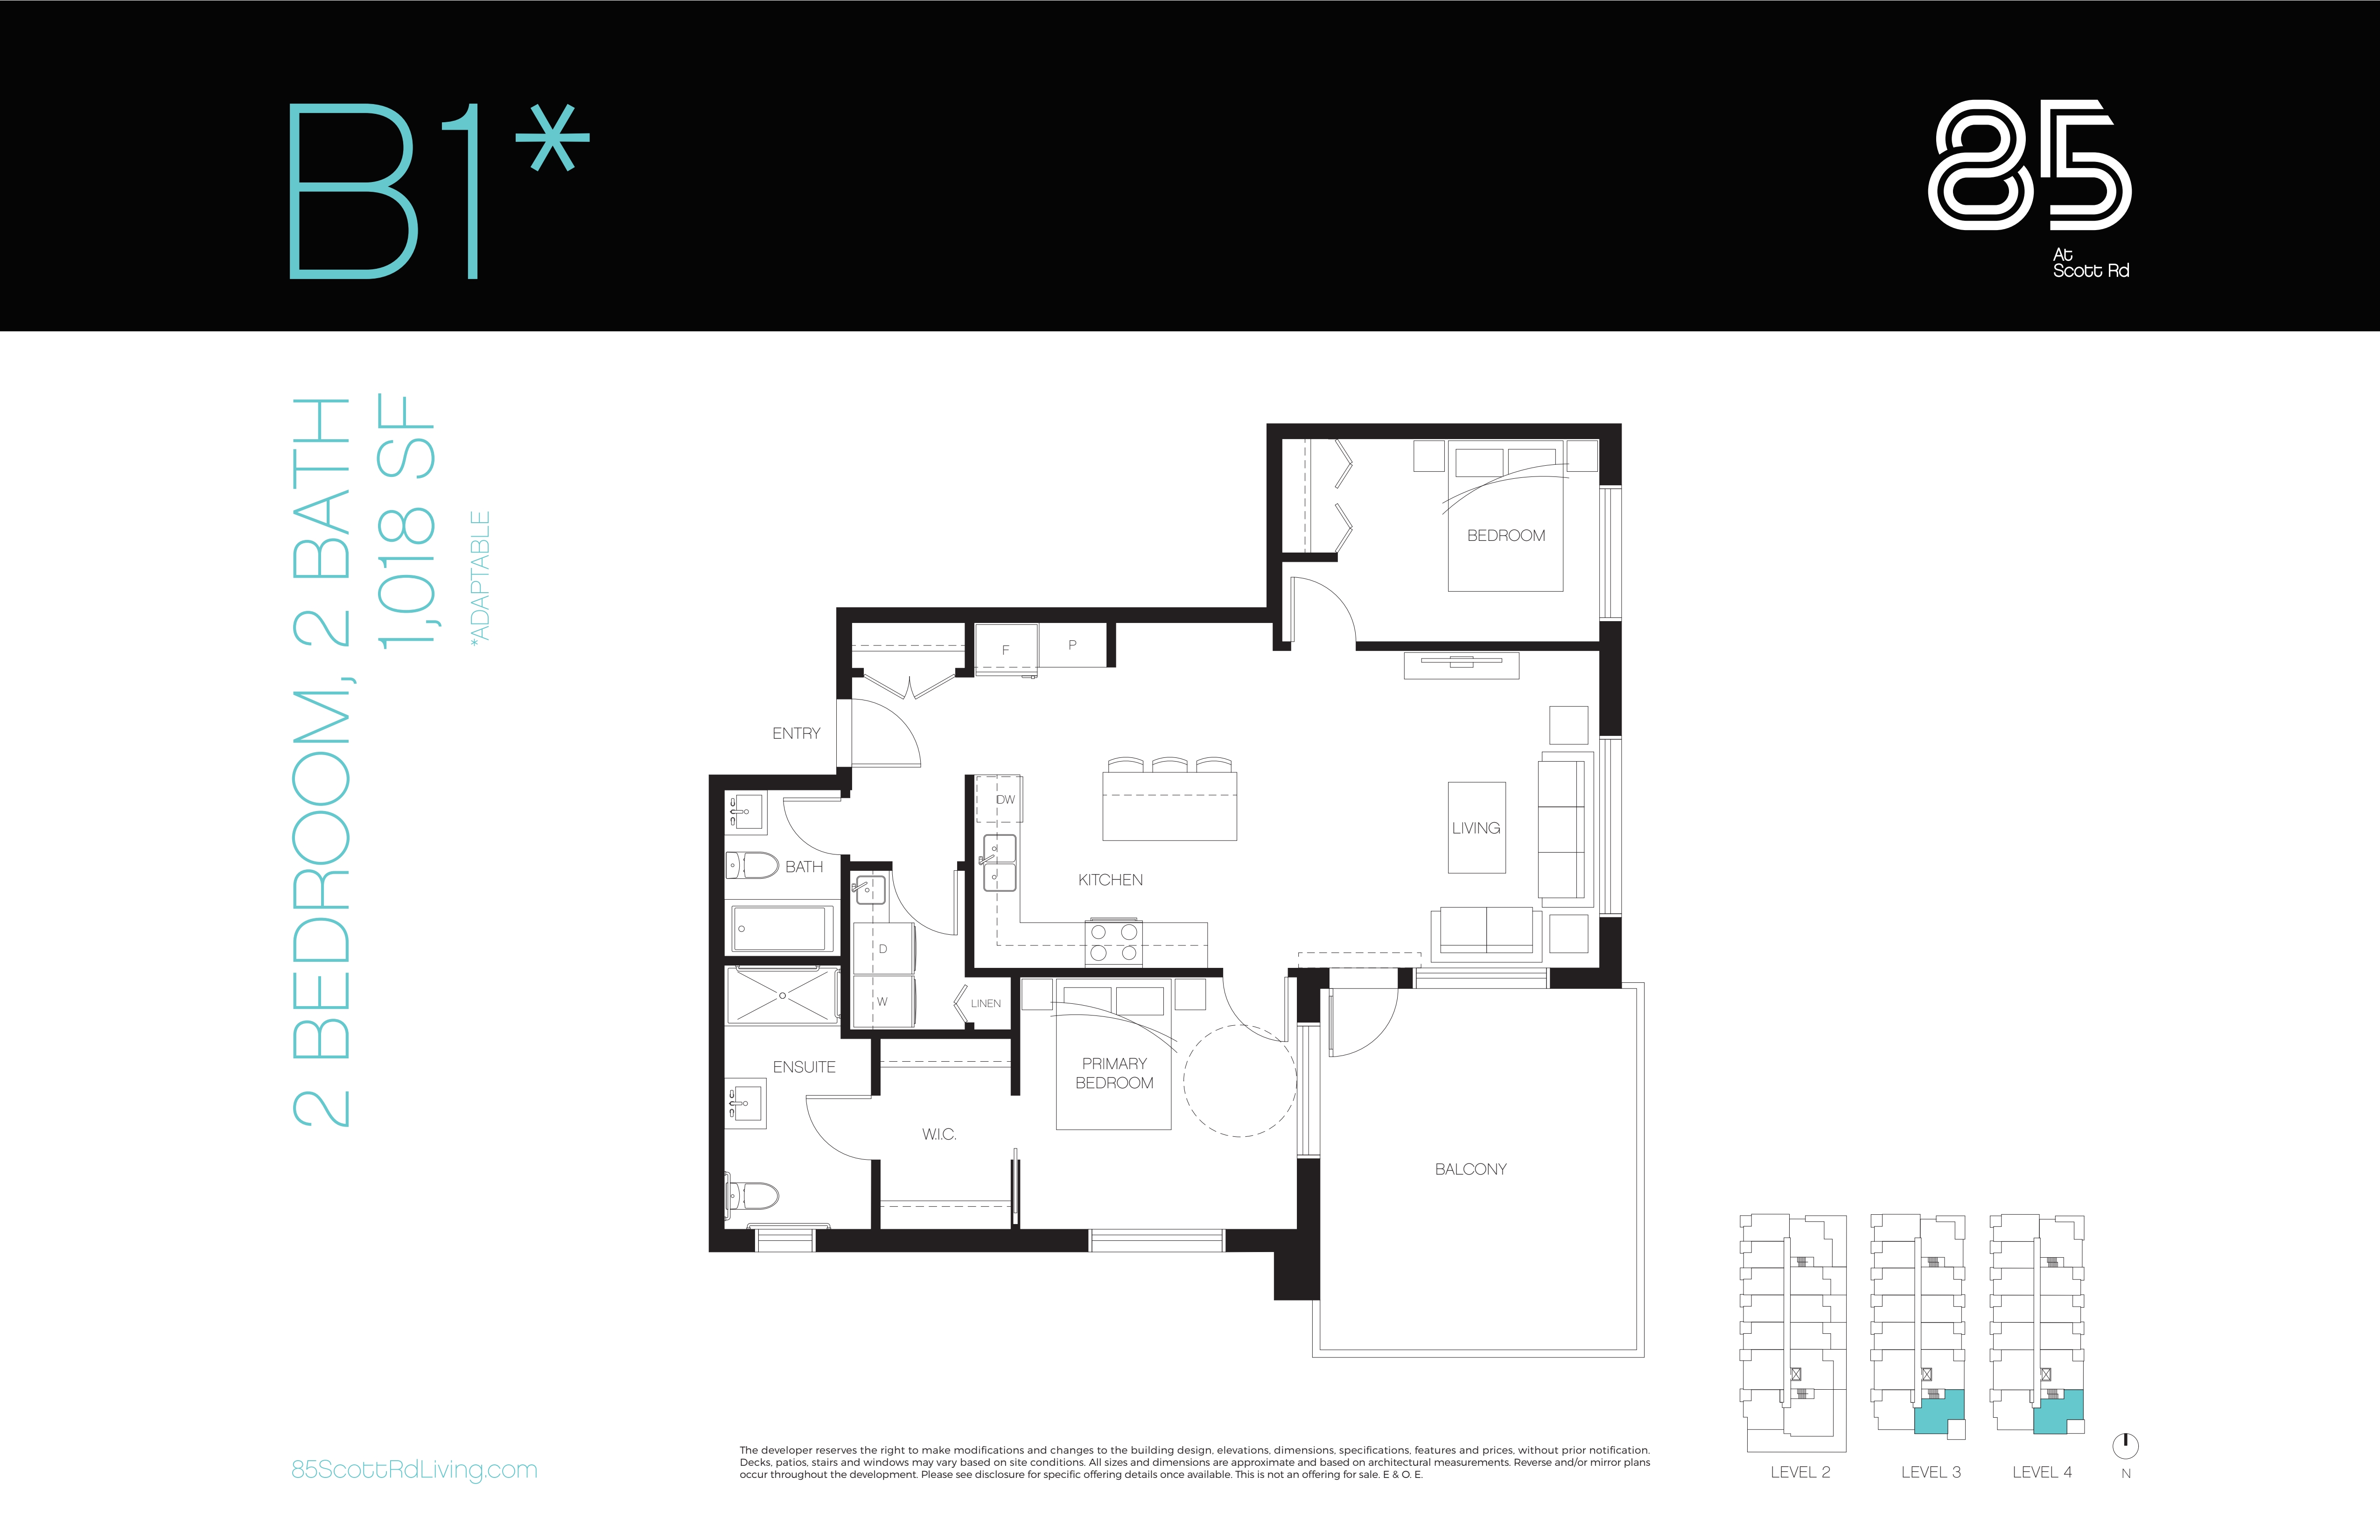 B1 Floor Plan of The 85 Condos with undefined beds